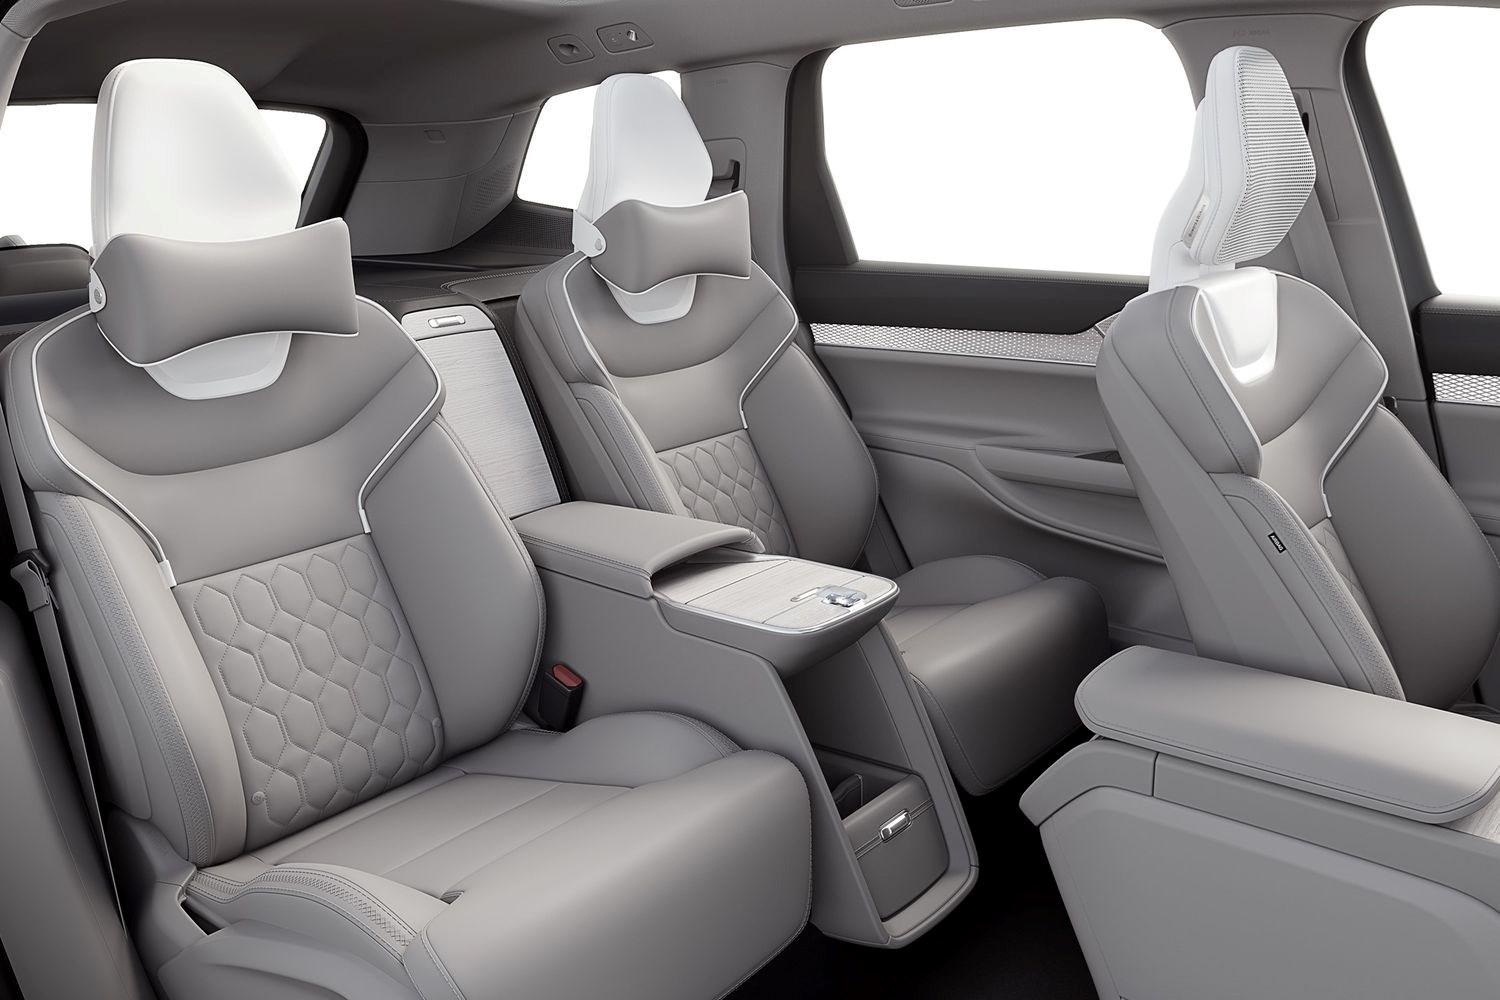 Close-up of the front and rear passenger seats in the new Volvo EX90